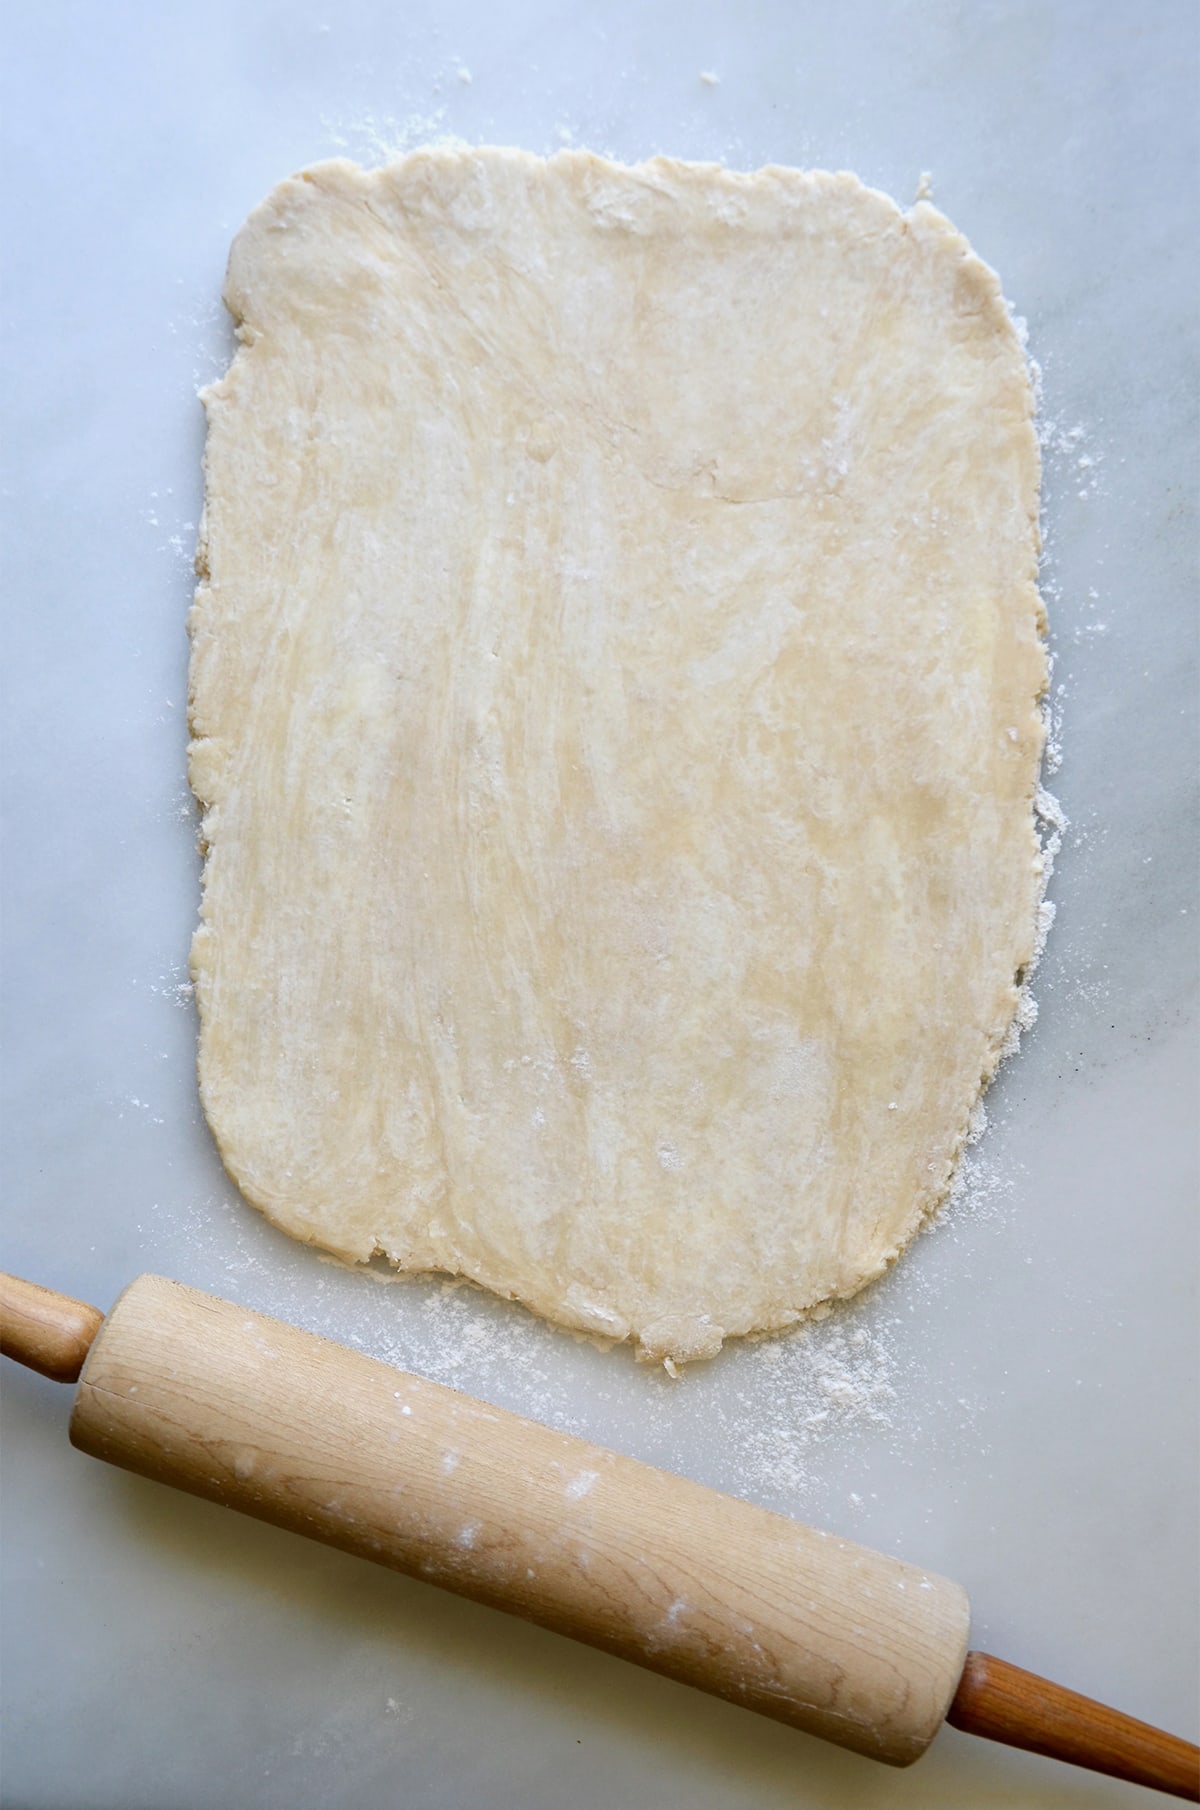 Rolled-out pie dough sits on a white work surface with a wooden rolling pin.